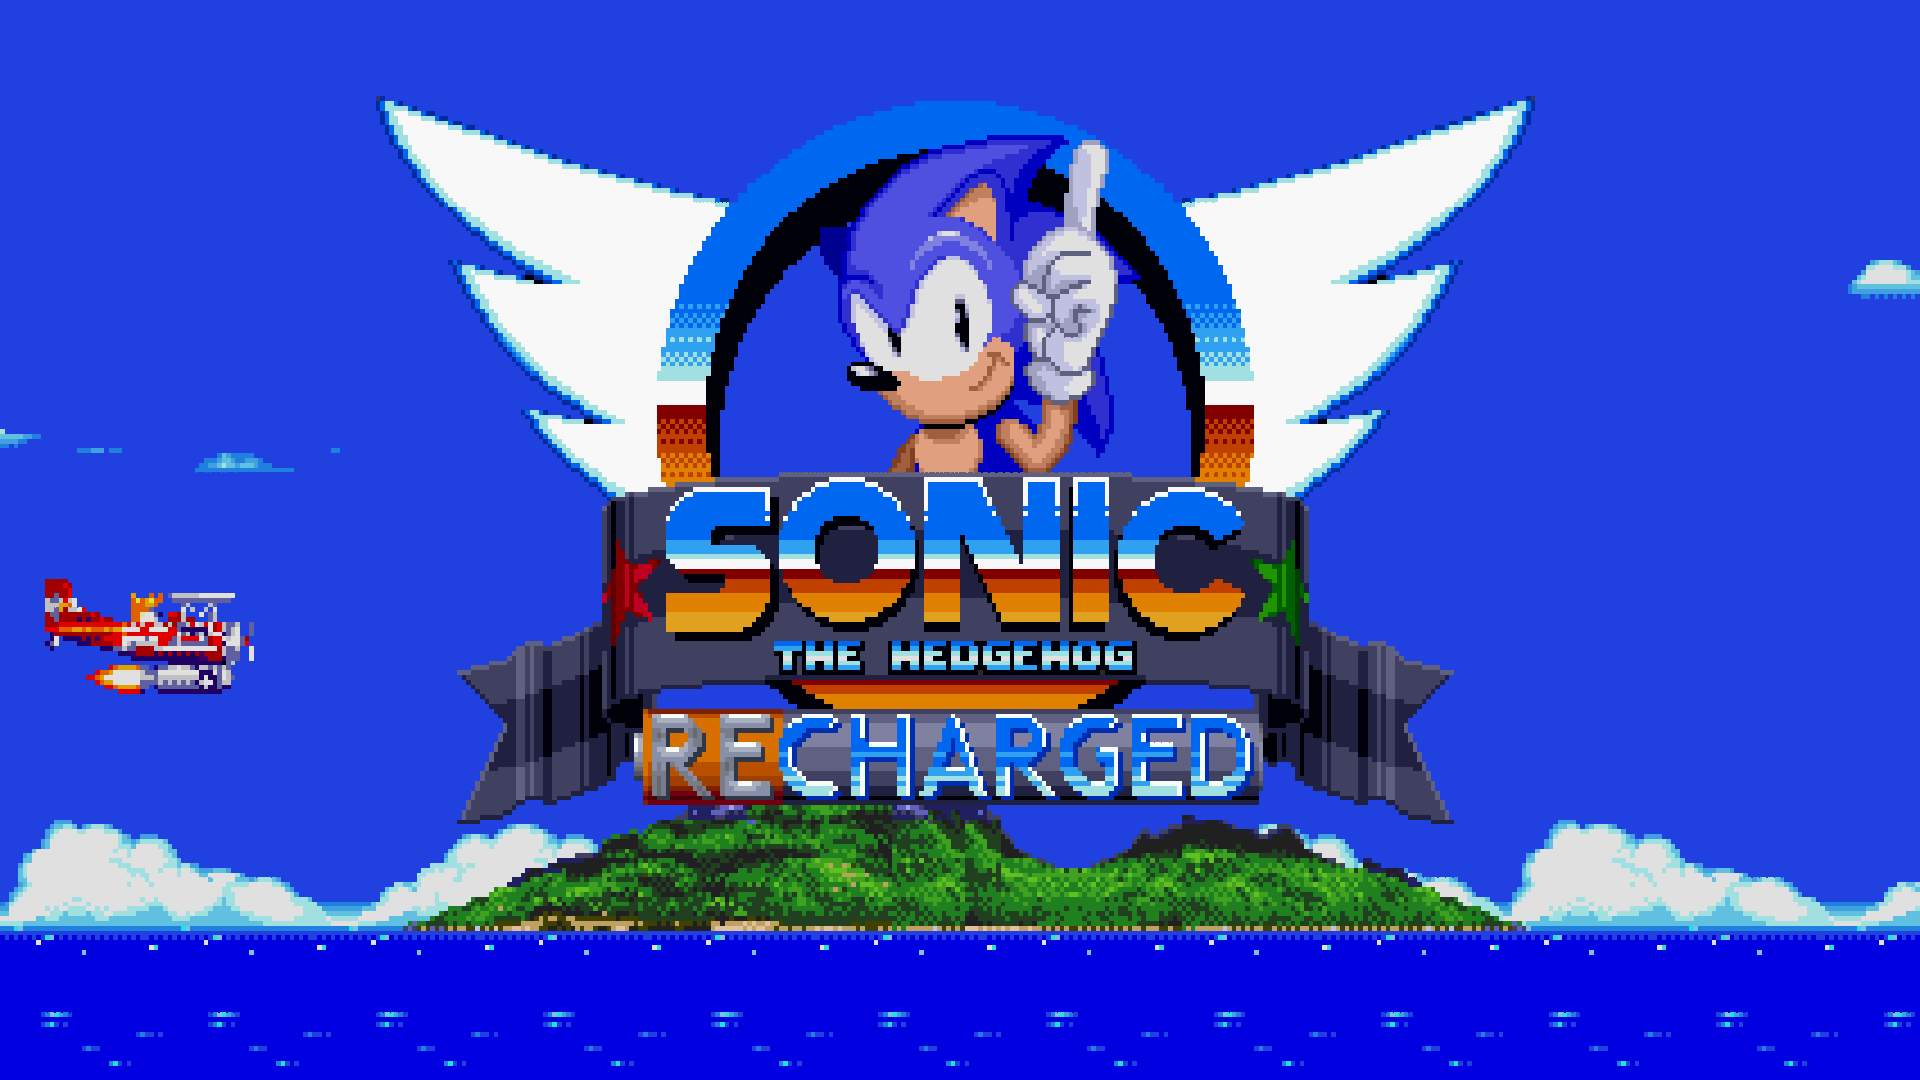 SAGE 2022 - Demo - Sonic Recharged - Online Co-Op mode